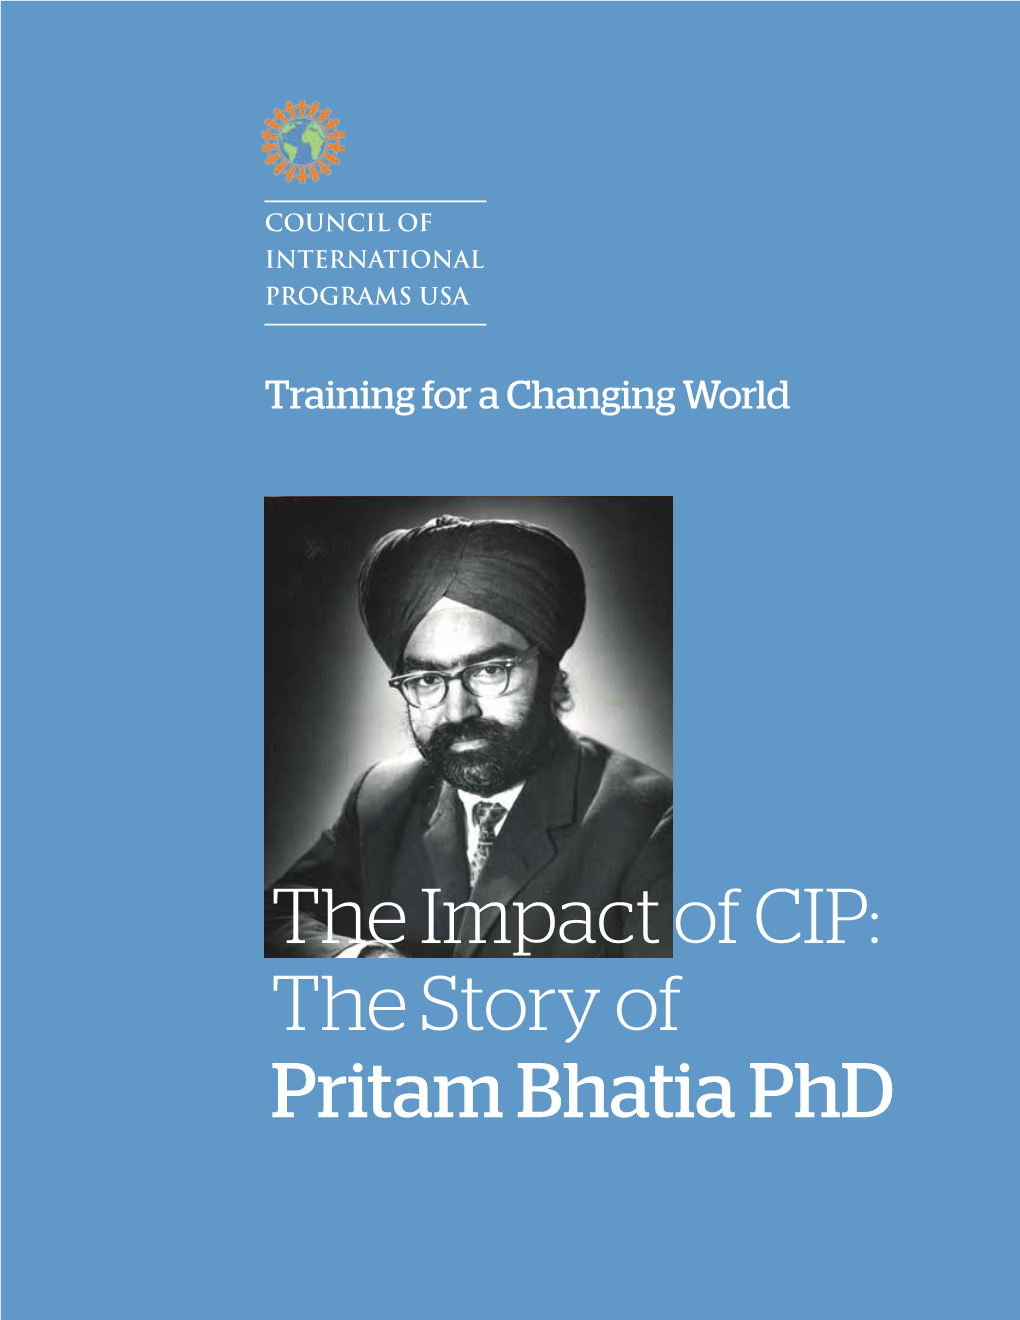 The Story of Pritam Bhatia Phd the Impact of CIP: the Story of Pritam Bhatia Phd